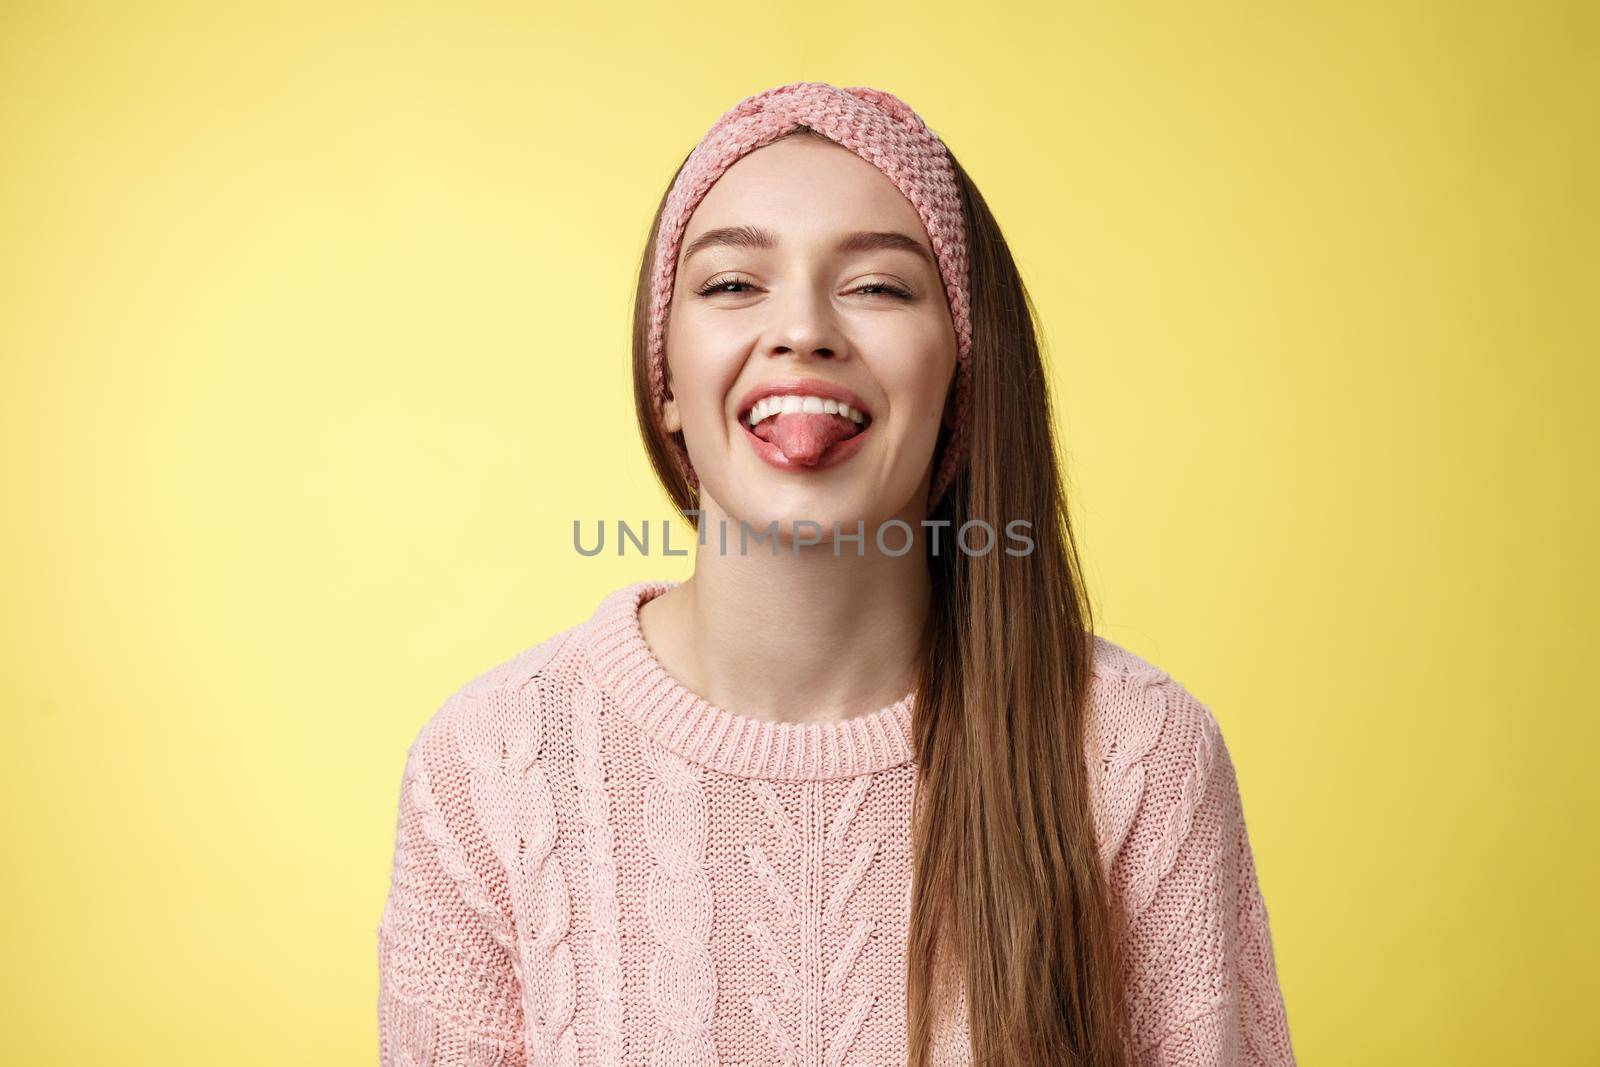 Positive entertained cute funny glamour young european girl in sweater, knitted trendy headband smiling fooling around showing tongue playfully, mocking friend enjoying sunny day over yellow wall.